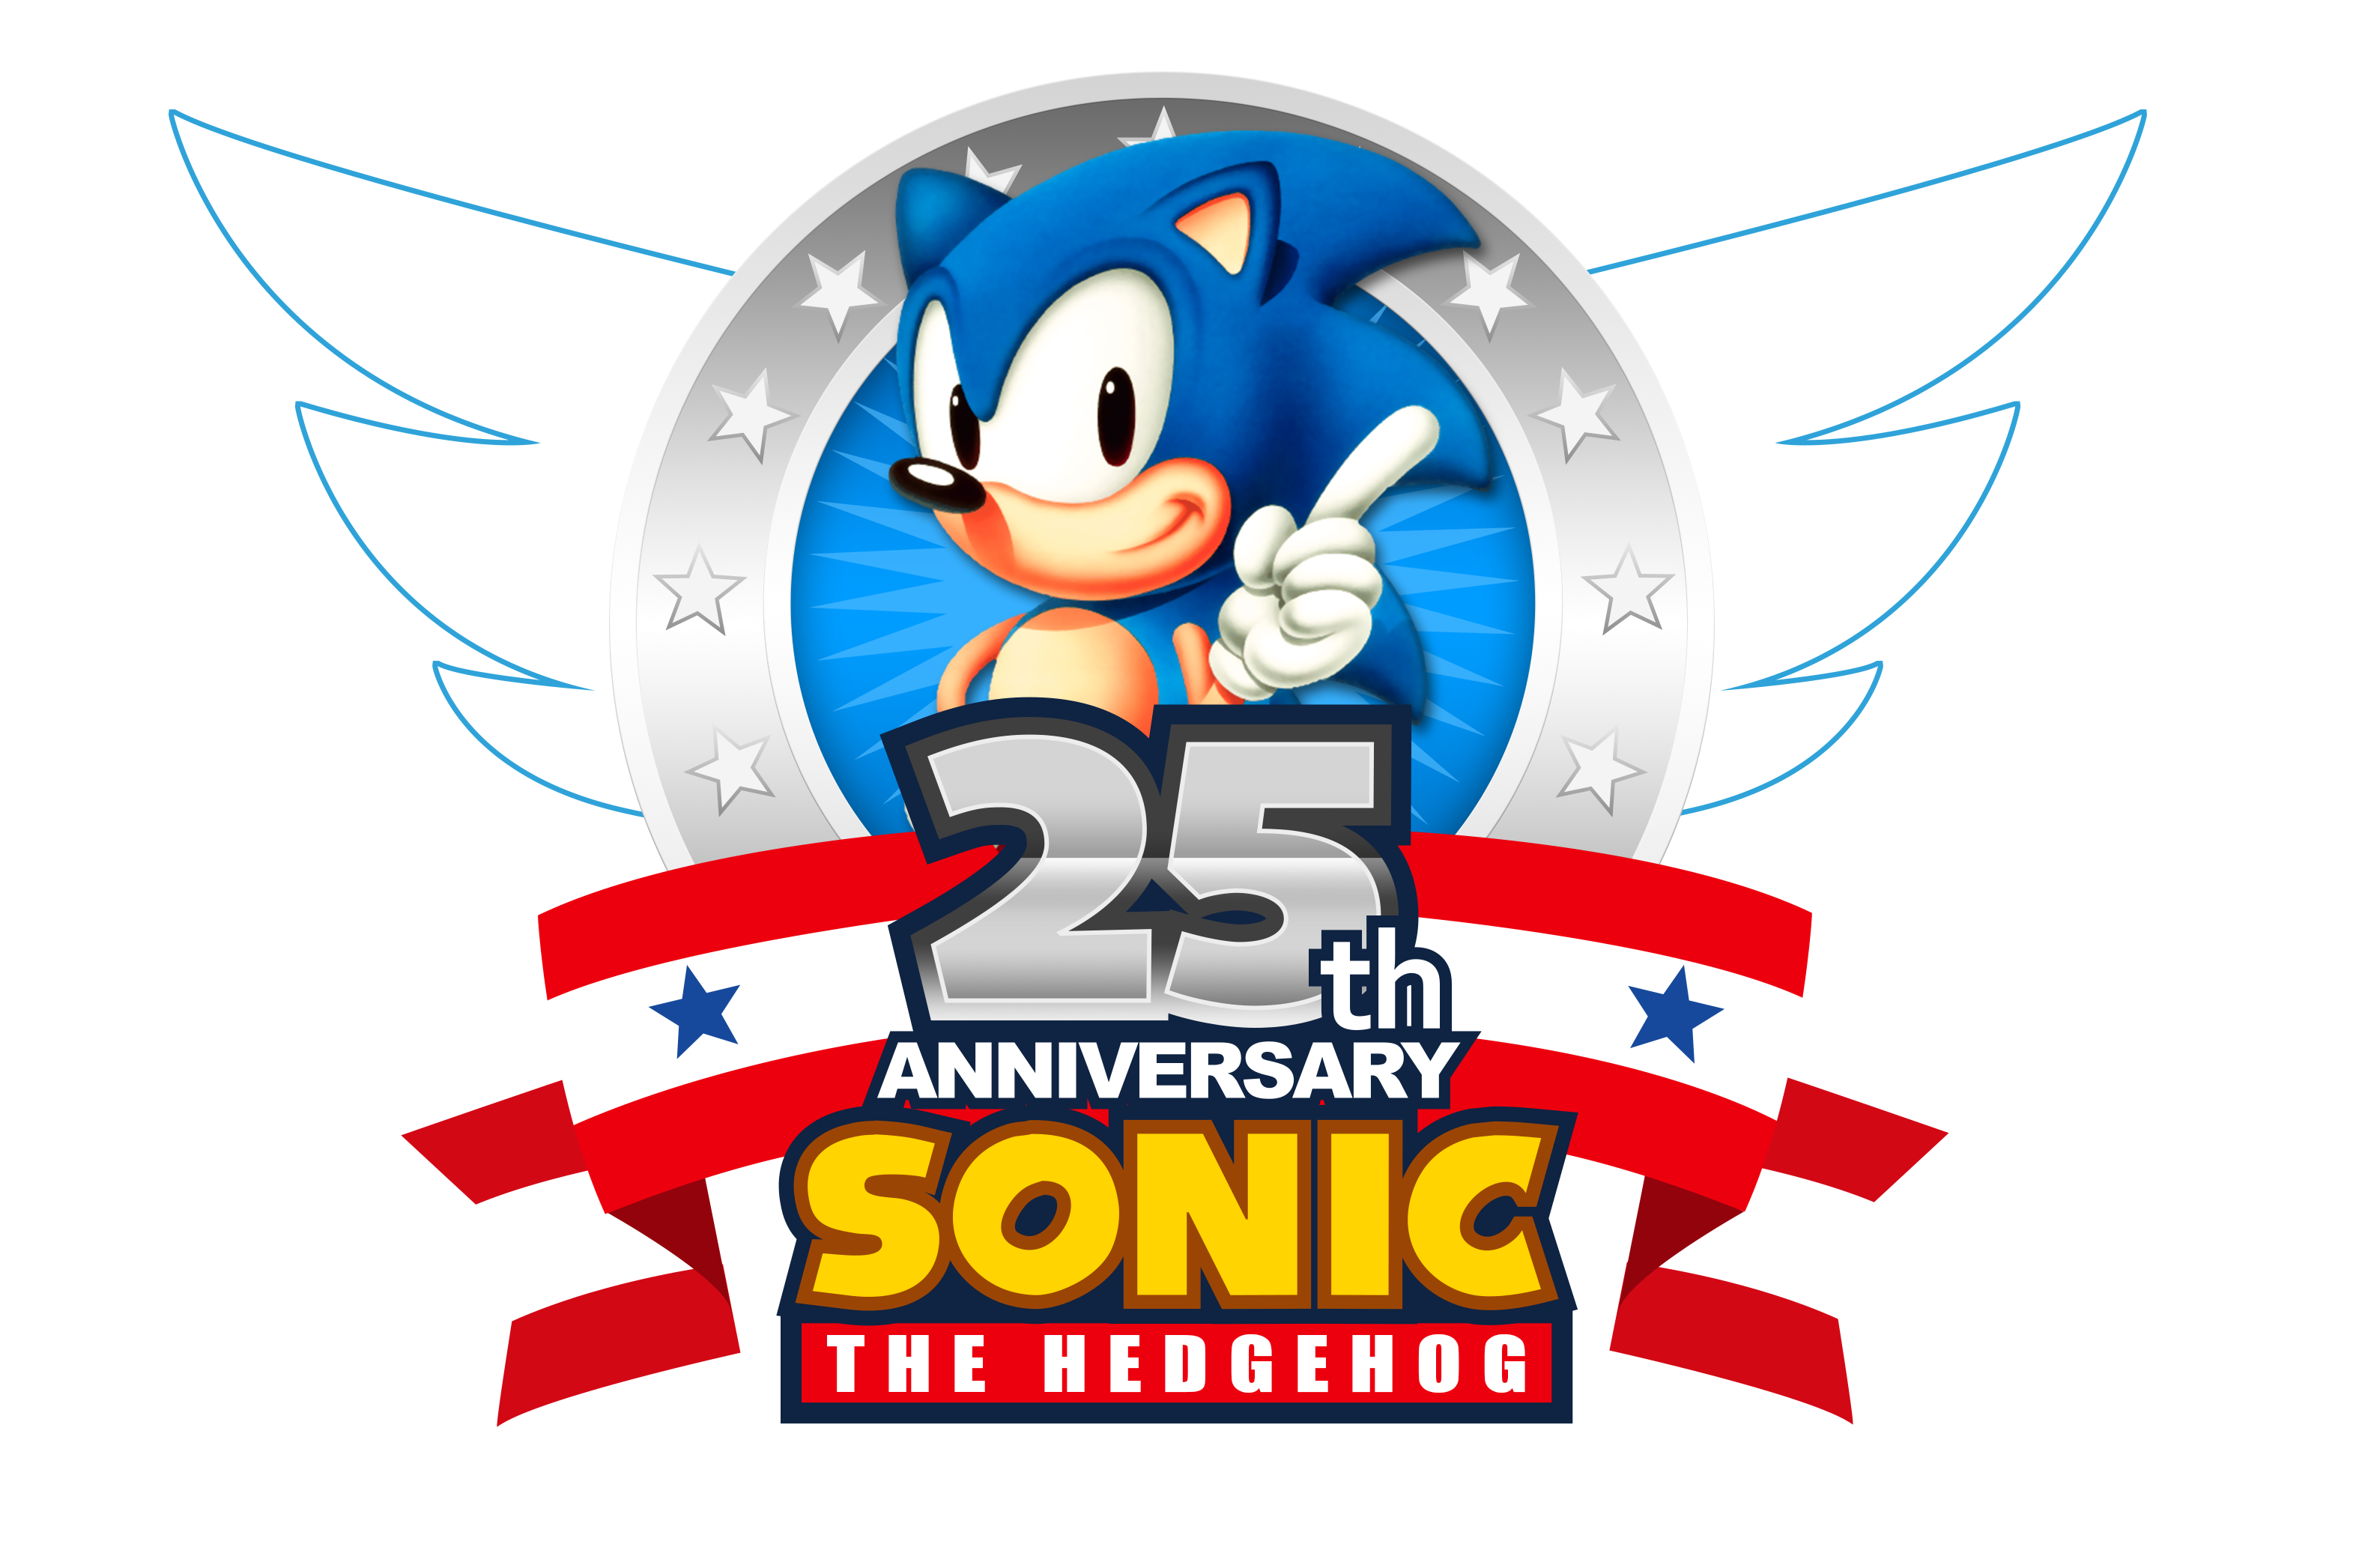 sonic_s_25th_anniversary_2016_logo__updated__by_nuryrush-d9lwi30.png